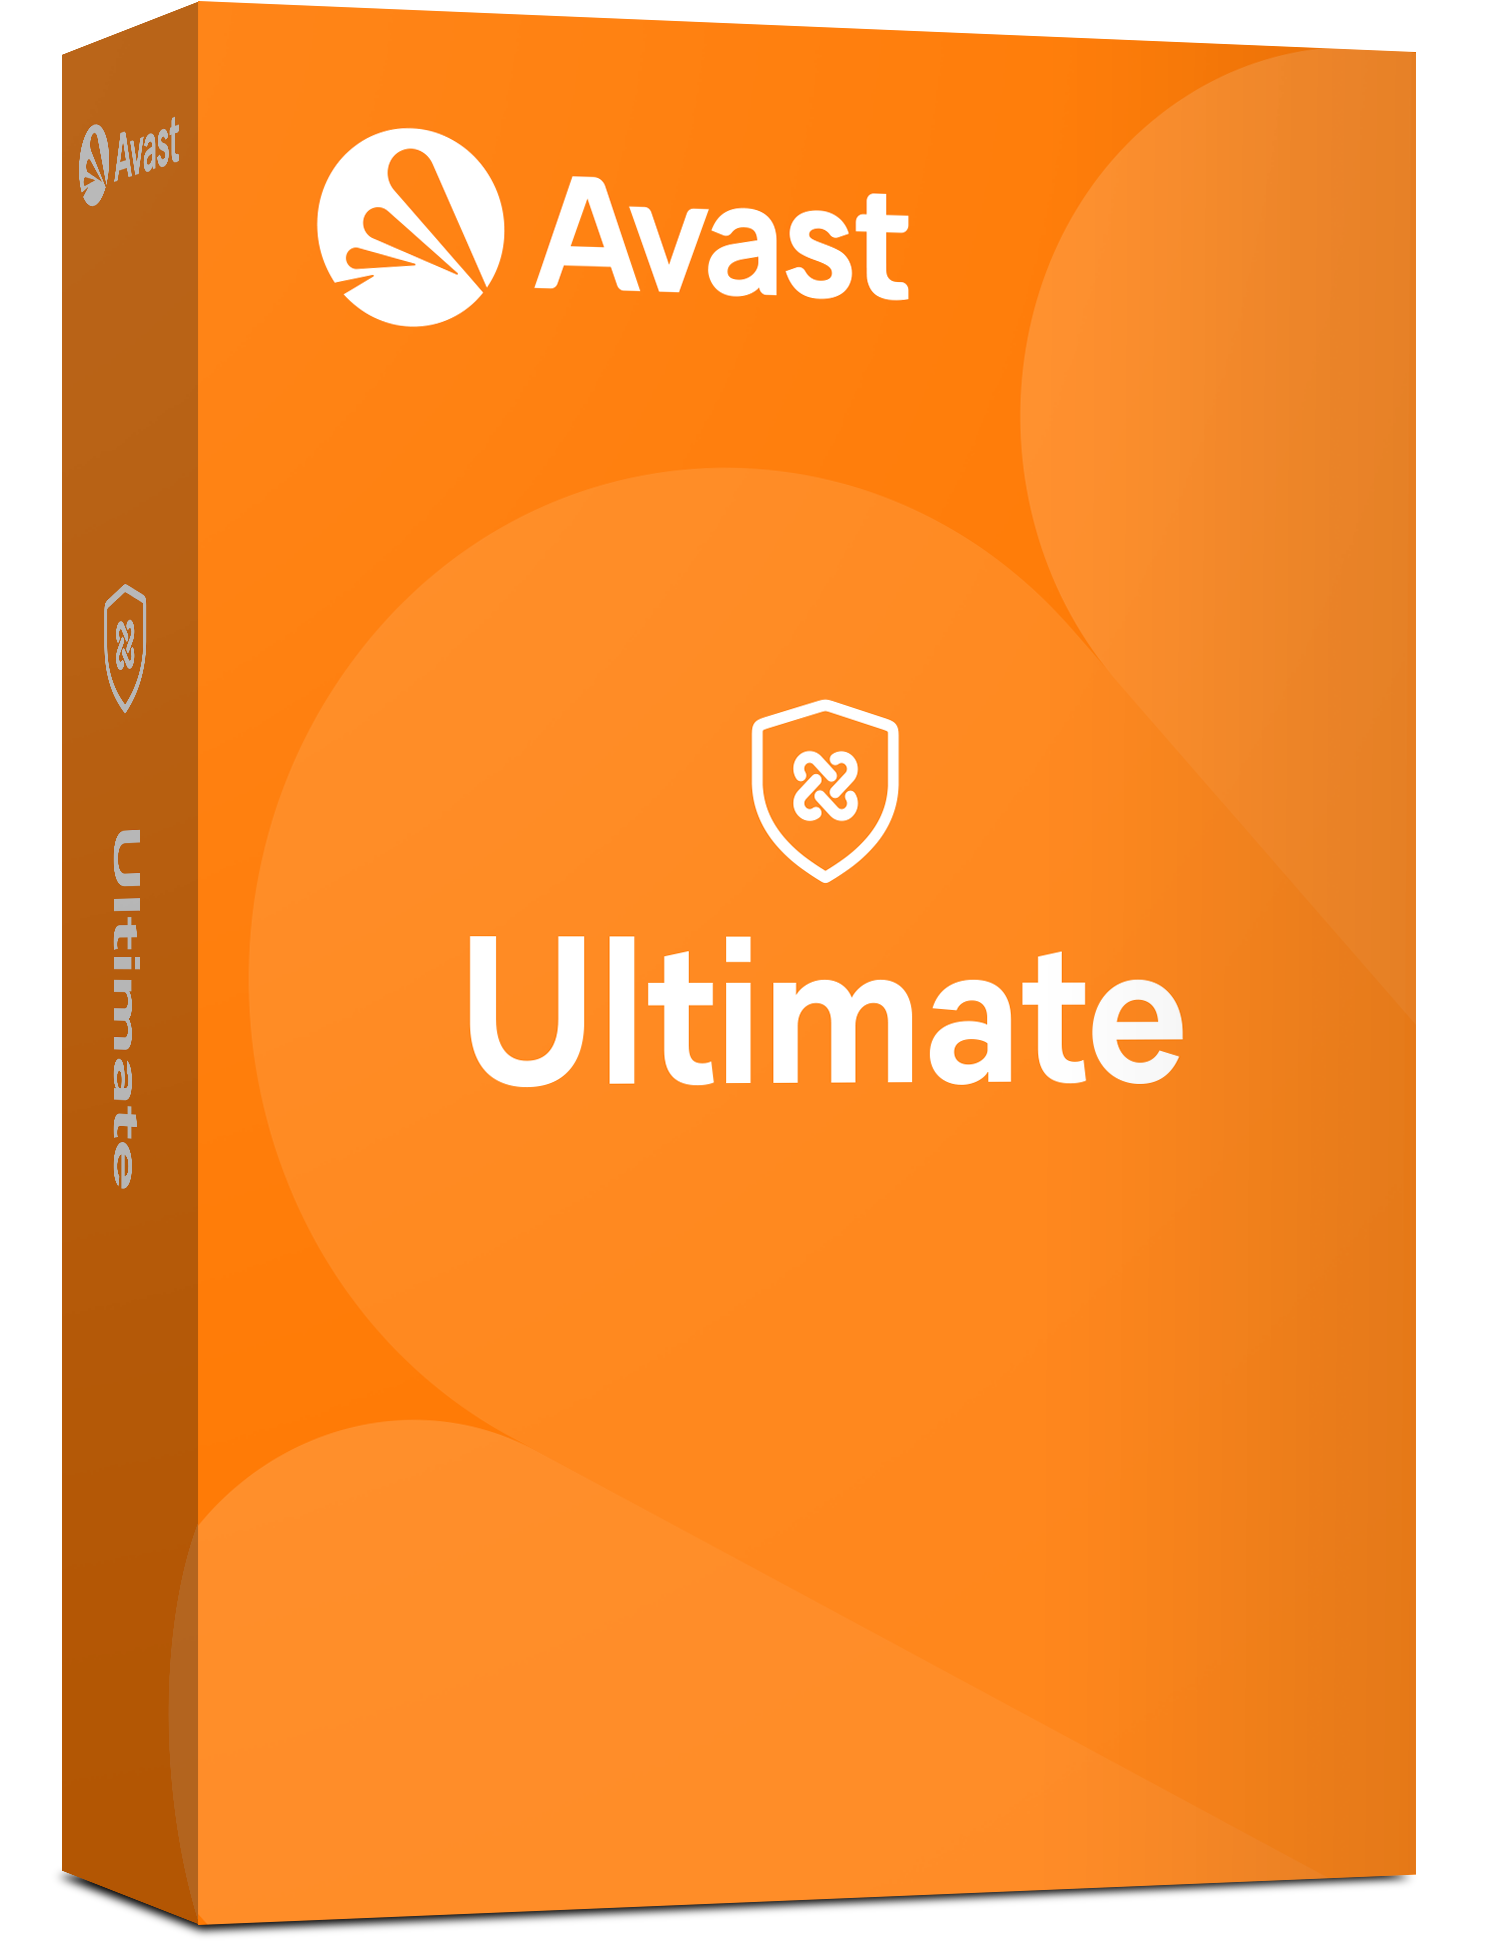 Avast_Ultimate_W_3D_Simplified_Box_right